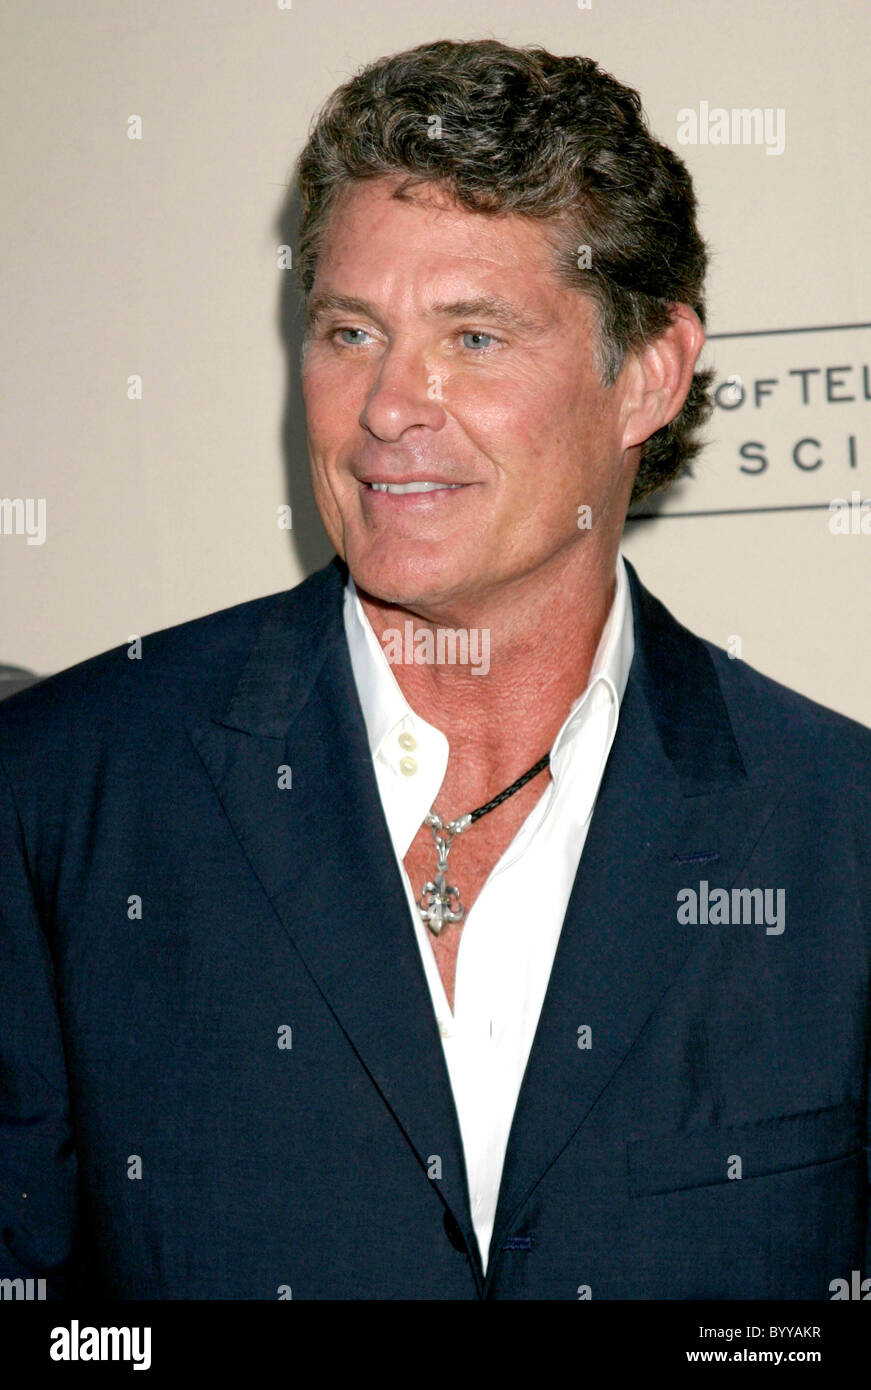 David Hasselhoff  Academy of TV Stunts Peer Group Reception held at the Academy of Television Arts & Sciences Hollywood, Stock Photo